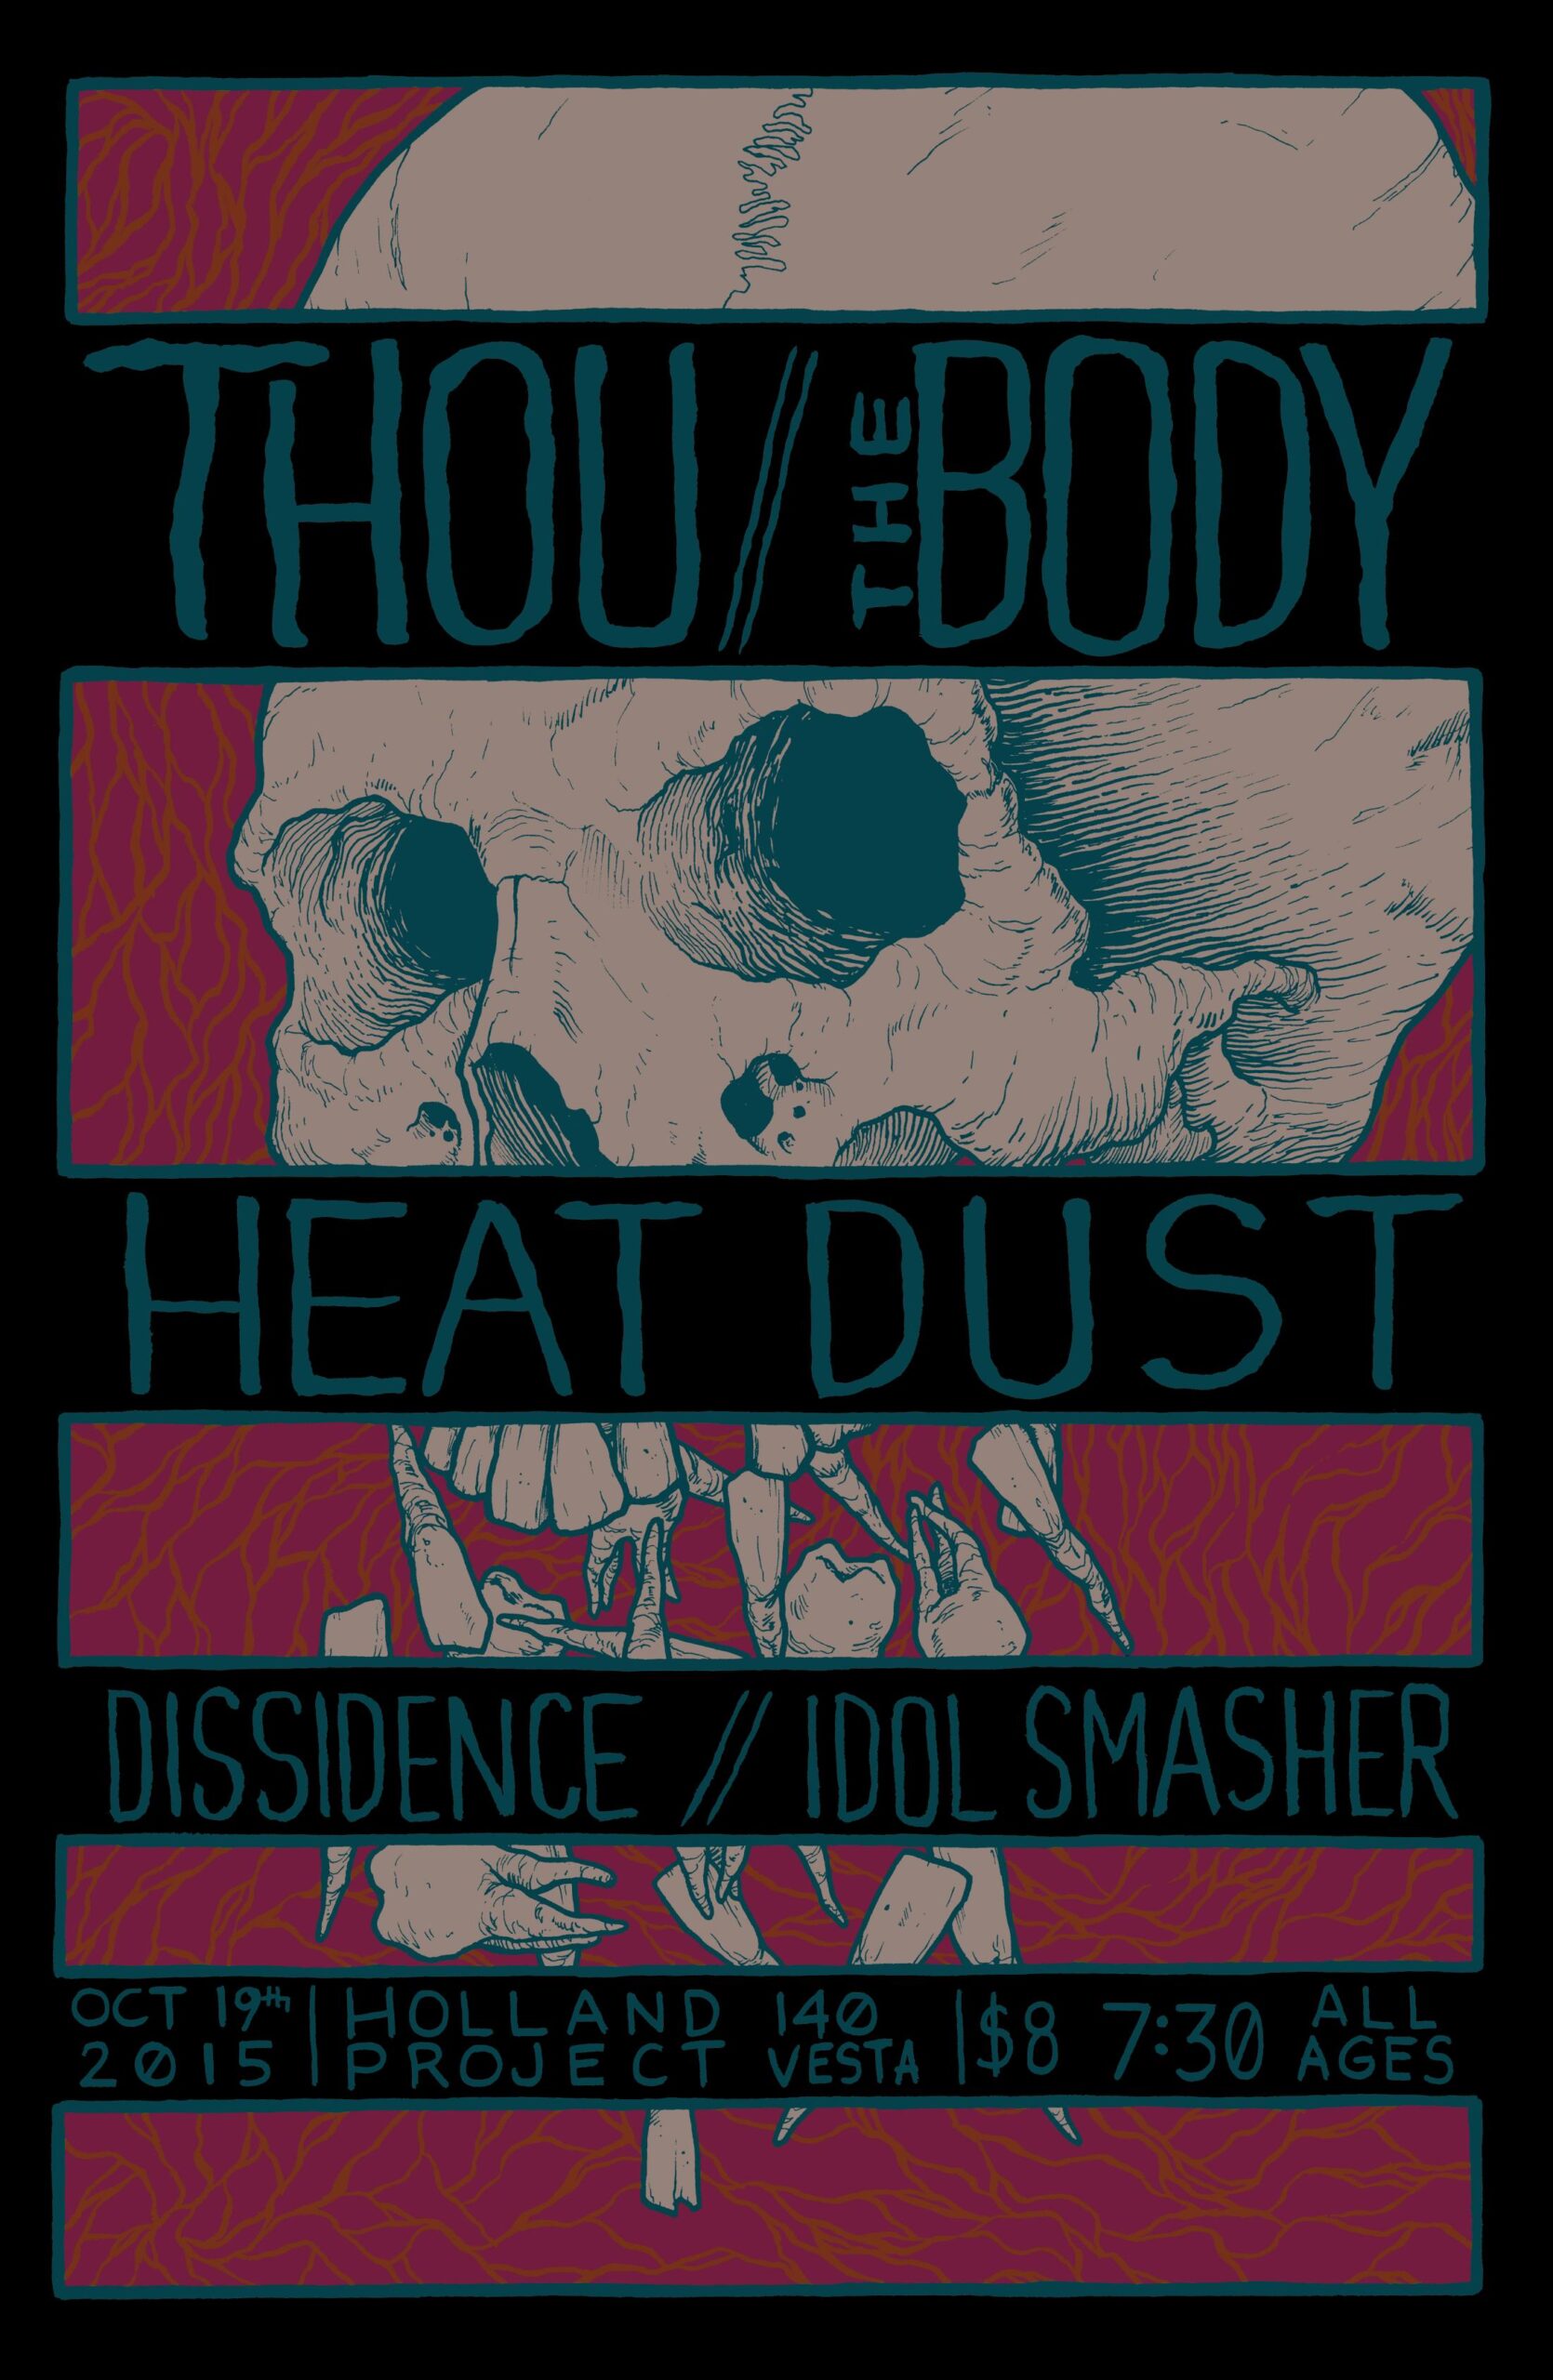 Thou, The Body, Dissidence, Heat Dust